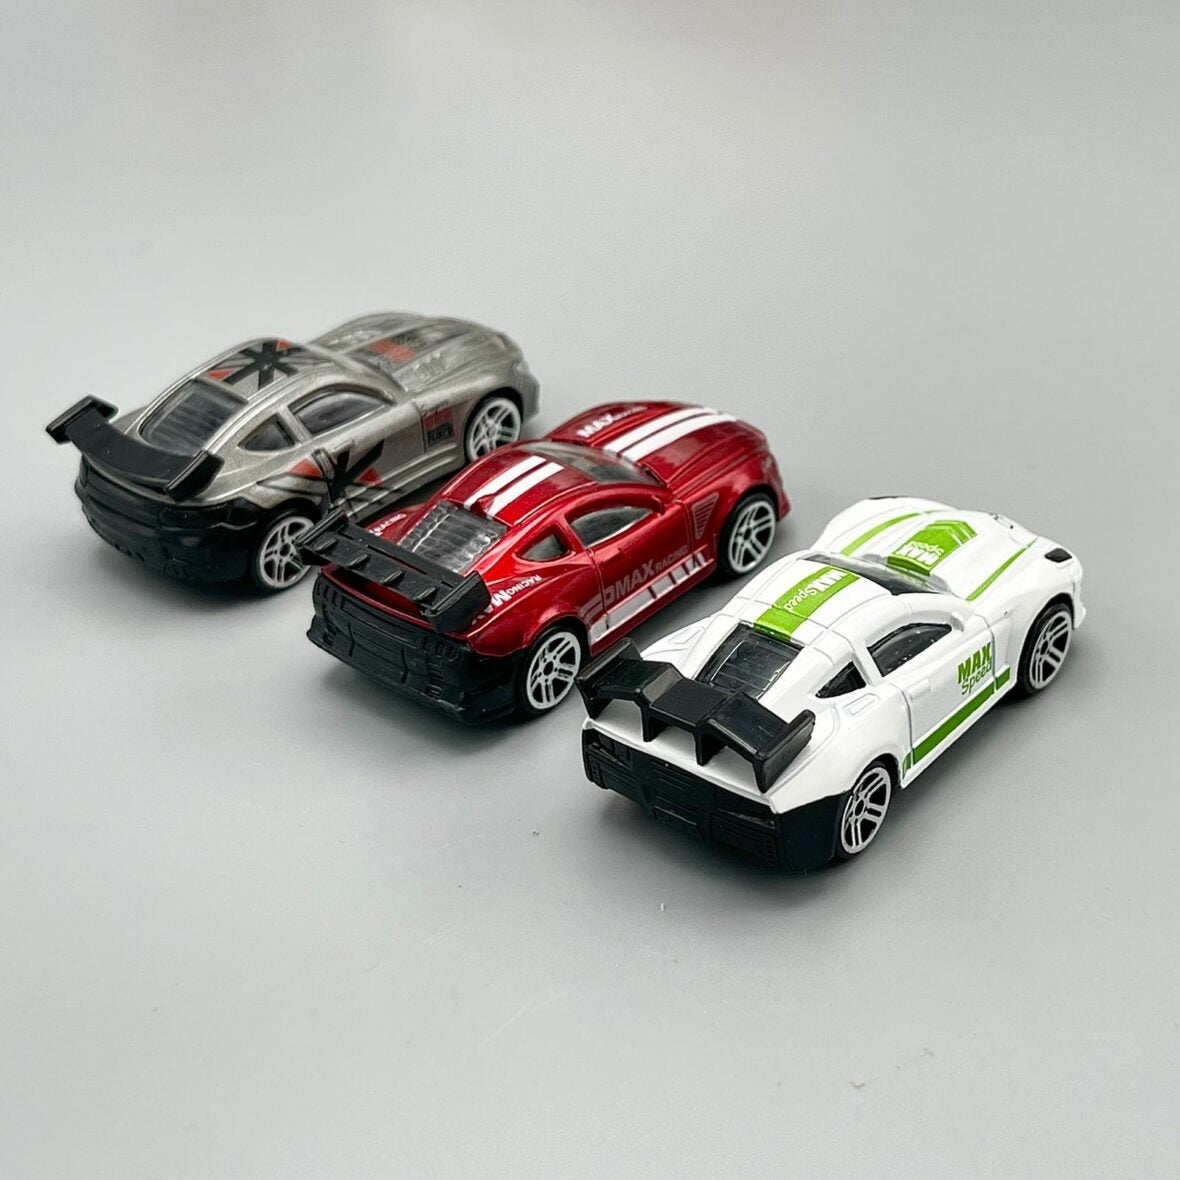 Pack Of 6 - Multi-Color Sports Racing Cars Kids Toy